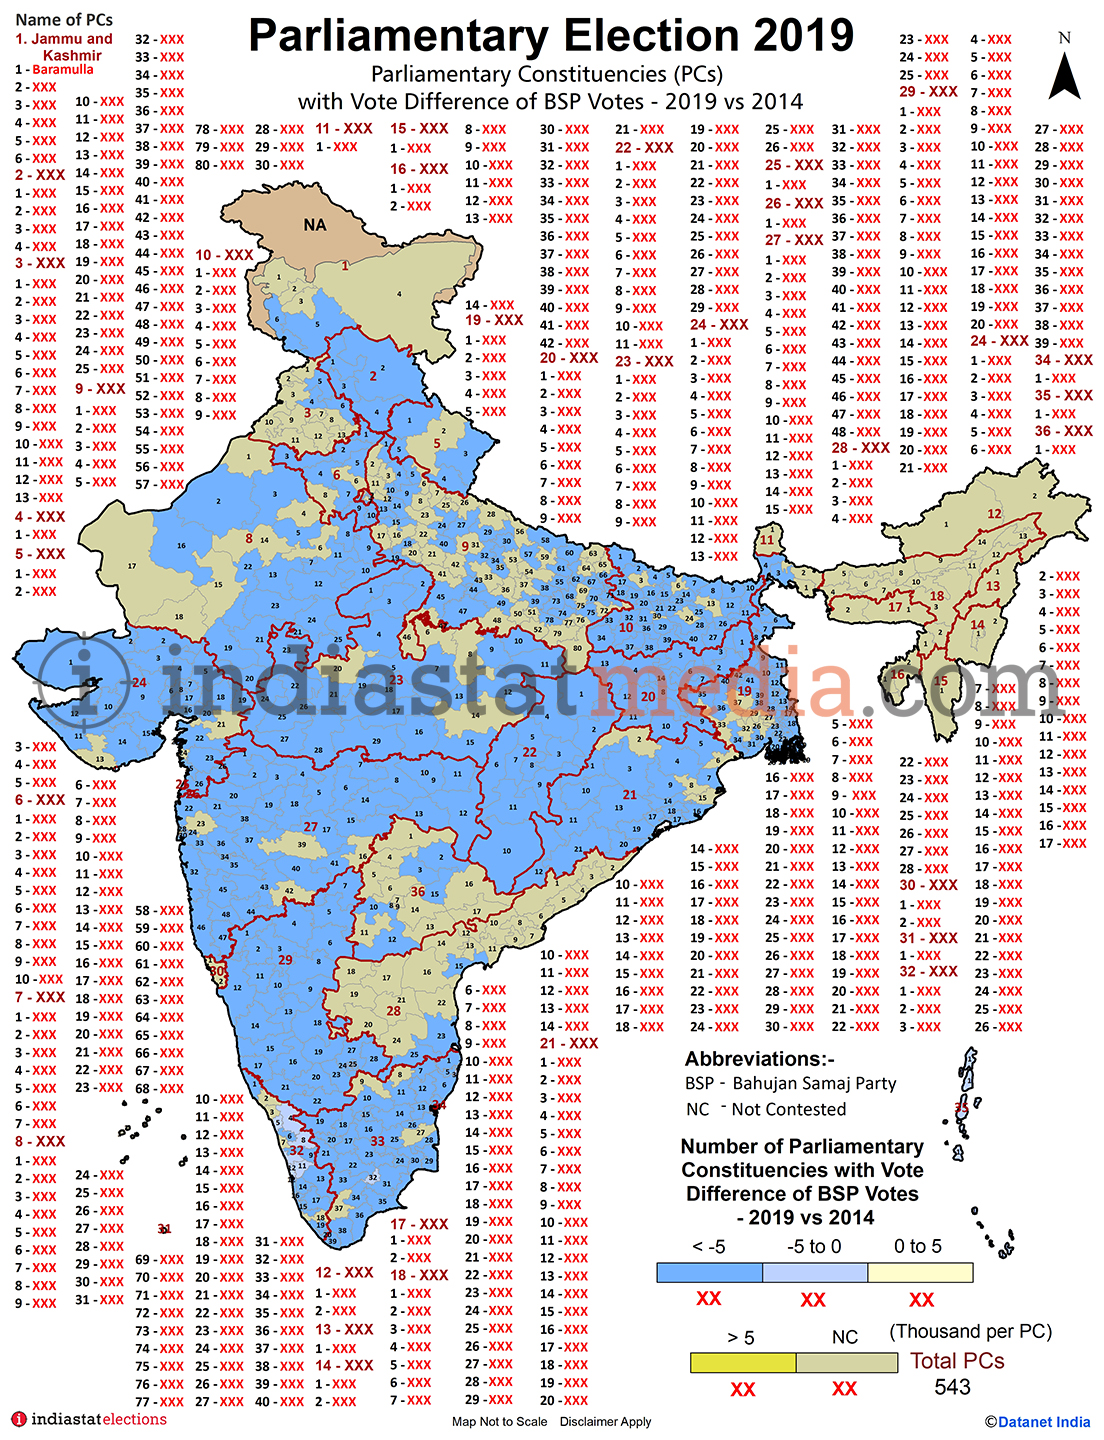 Parliamentary Constituencies with Vote Difference of BSP Votes in India (Parliamentary Elections - 2014 & 2019)